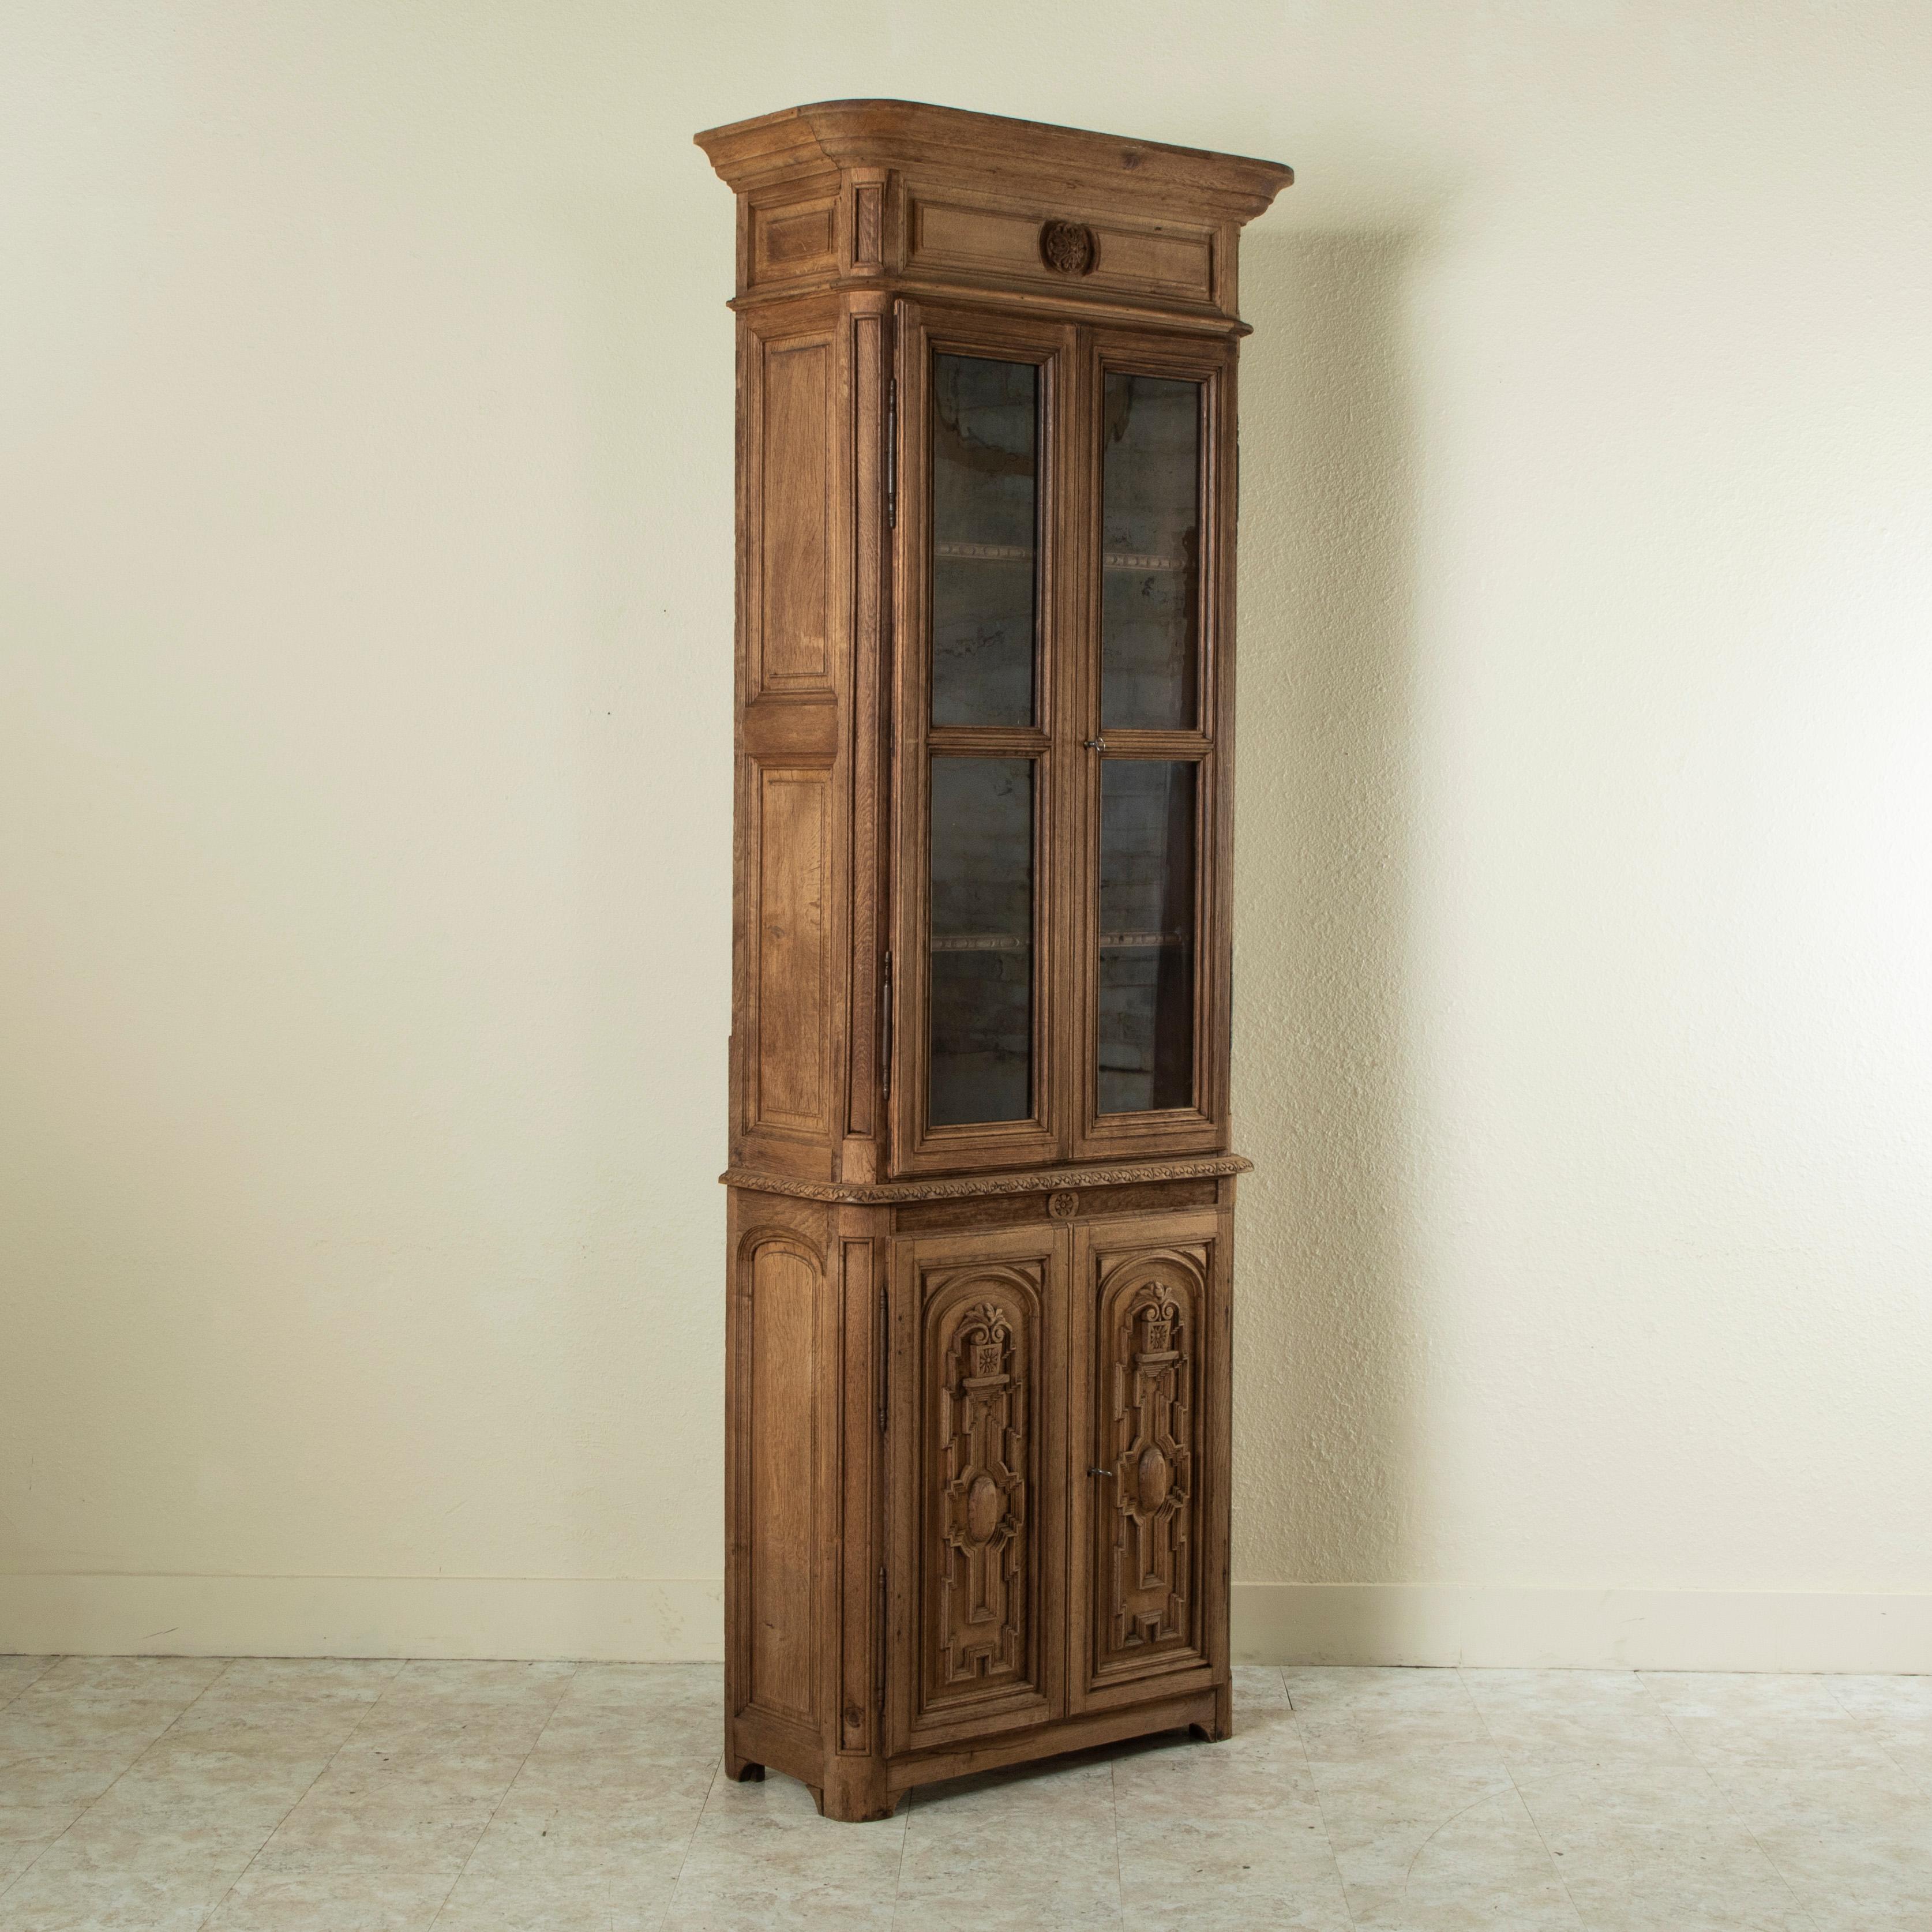 Standing just over 8 feet in height, this tall, narrow late nineteenth century French Henri II style bleached oak bookcase or vitrine features two upper doors with their original hand blown glass. The upper doors open to reveal an interior with four